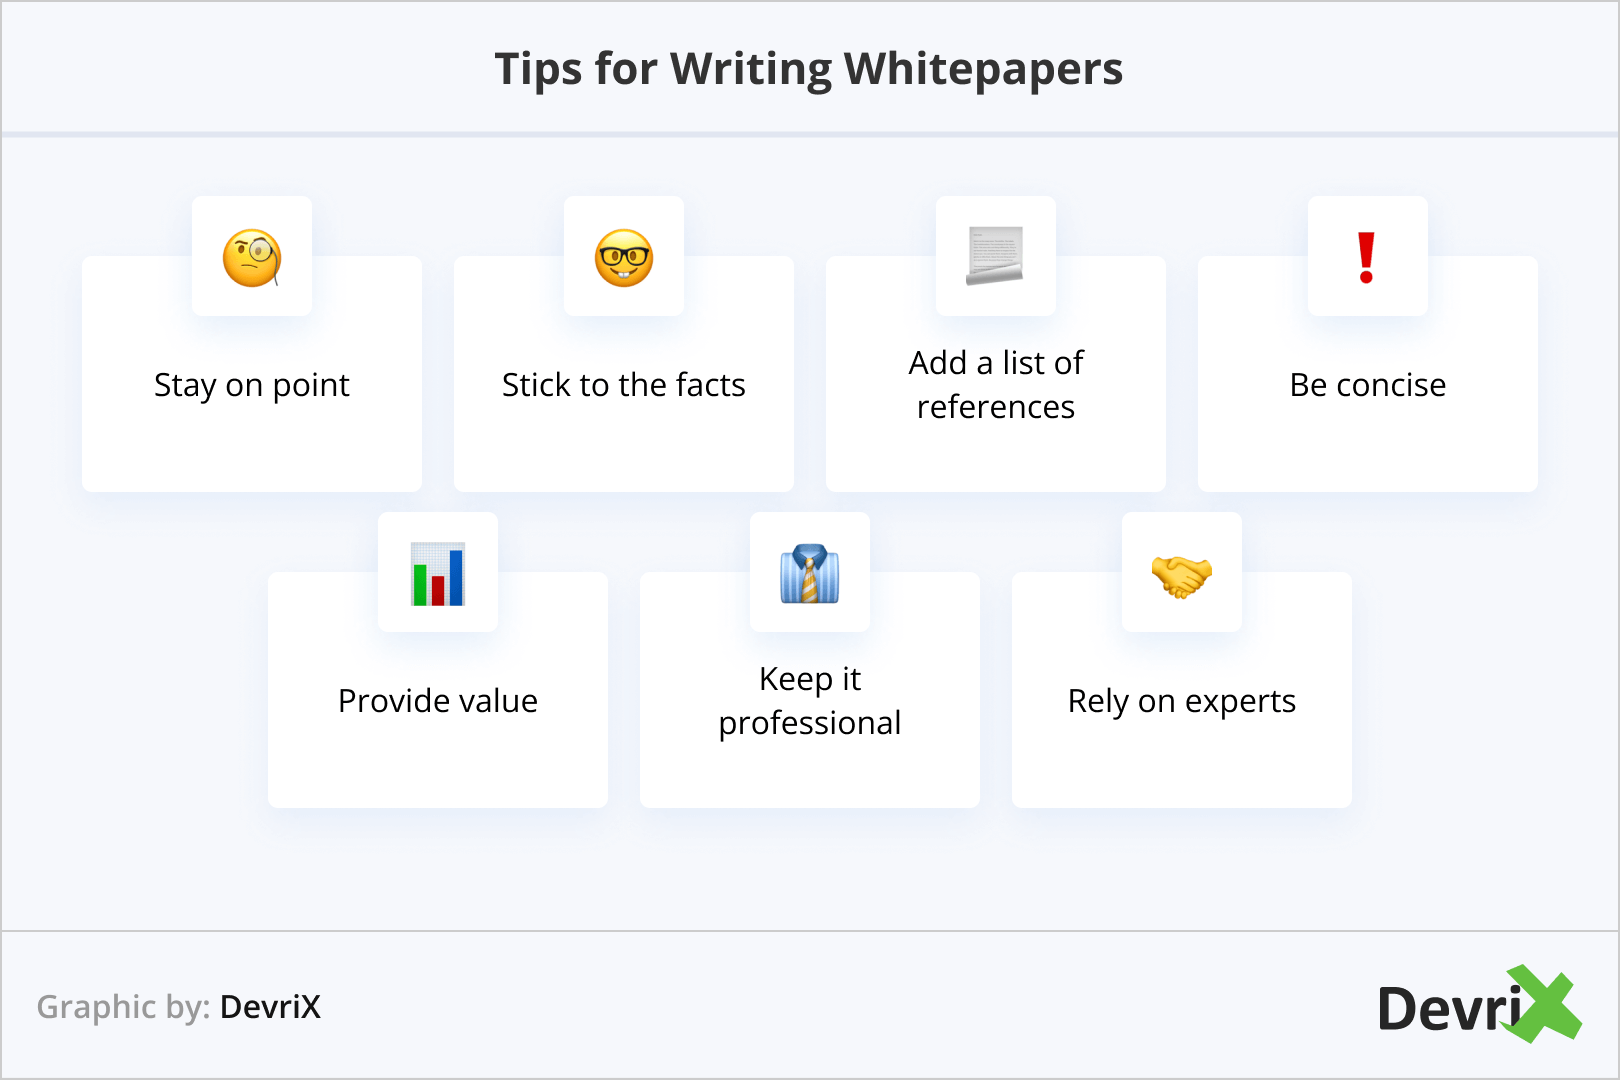 Tips for Writing Whitepapers